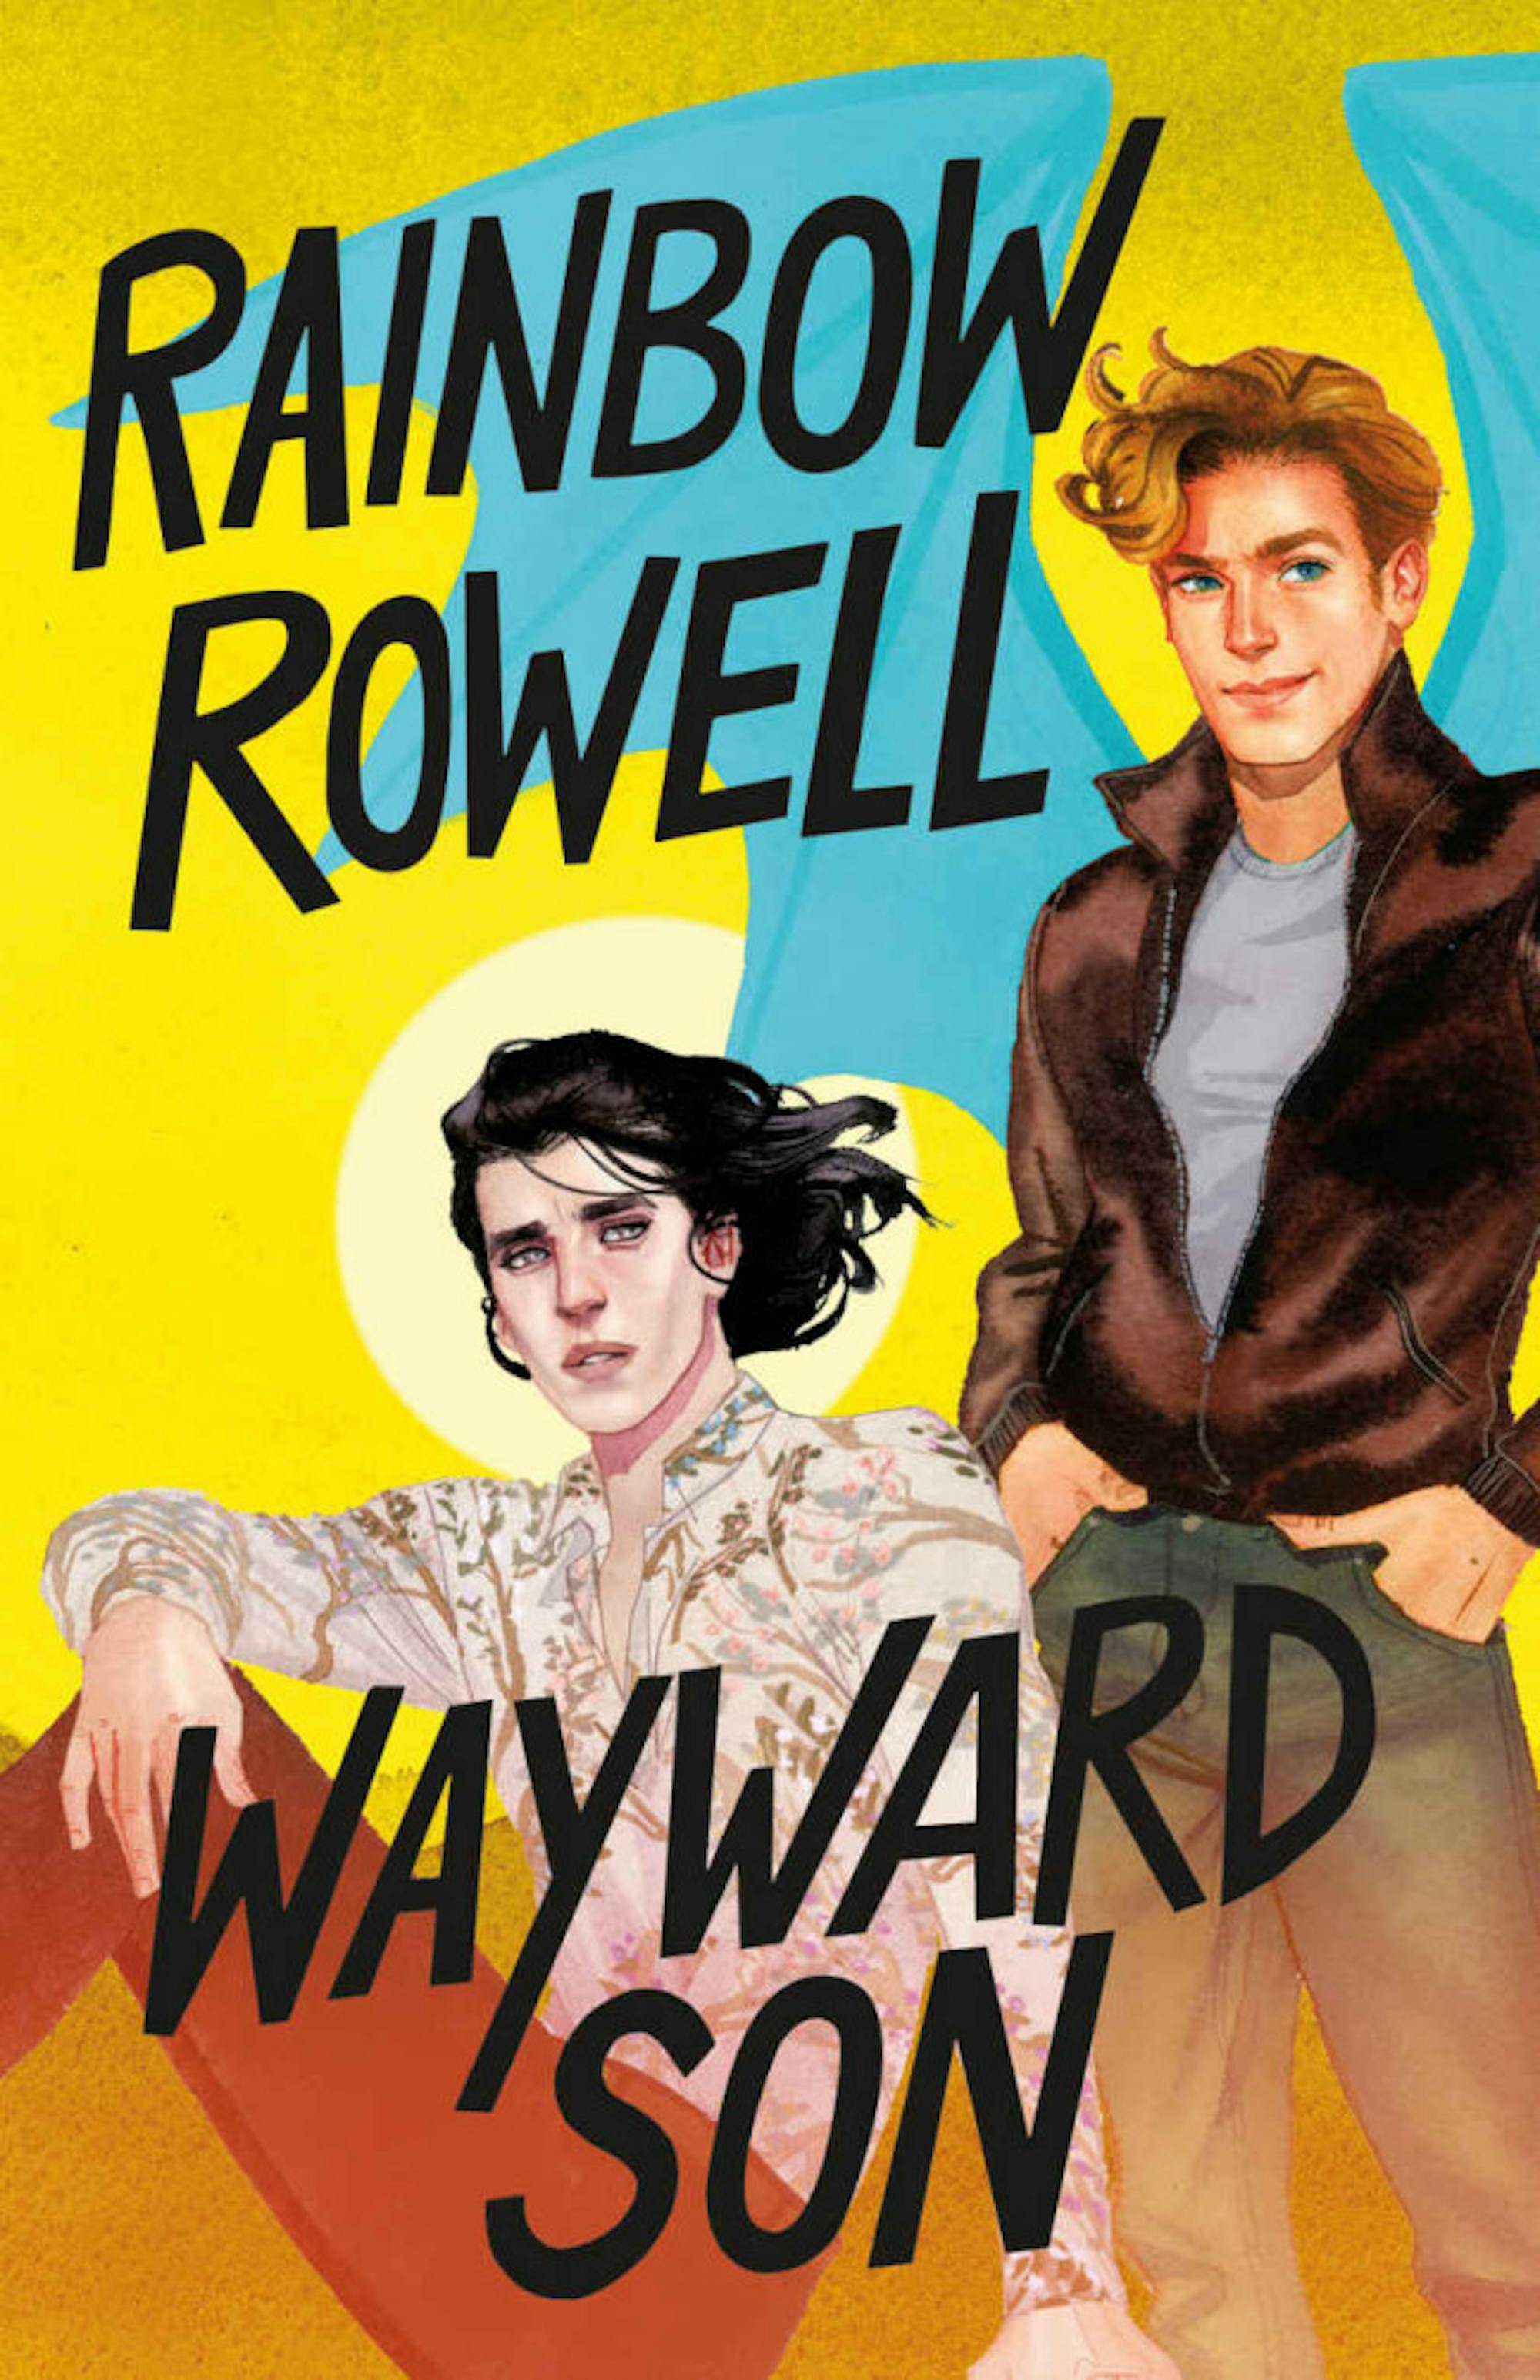 About — Rainbow Rowell